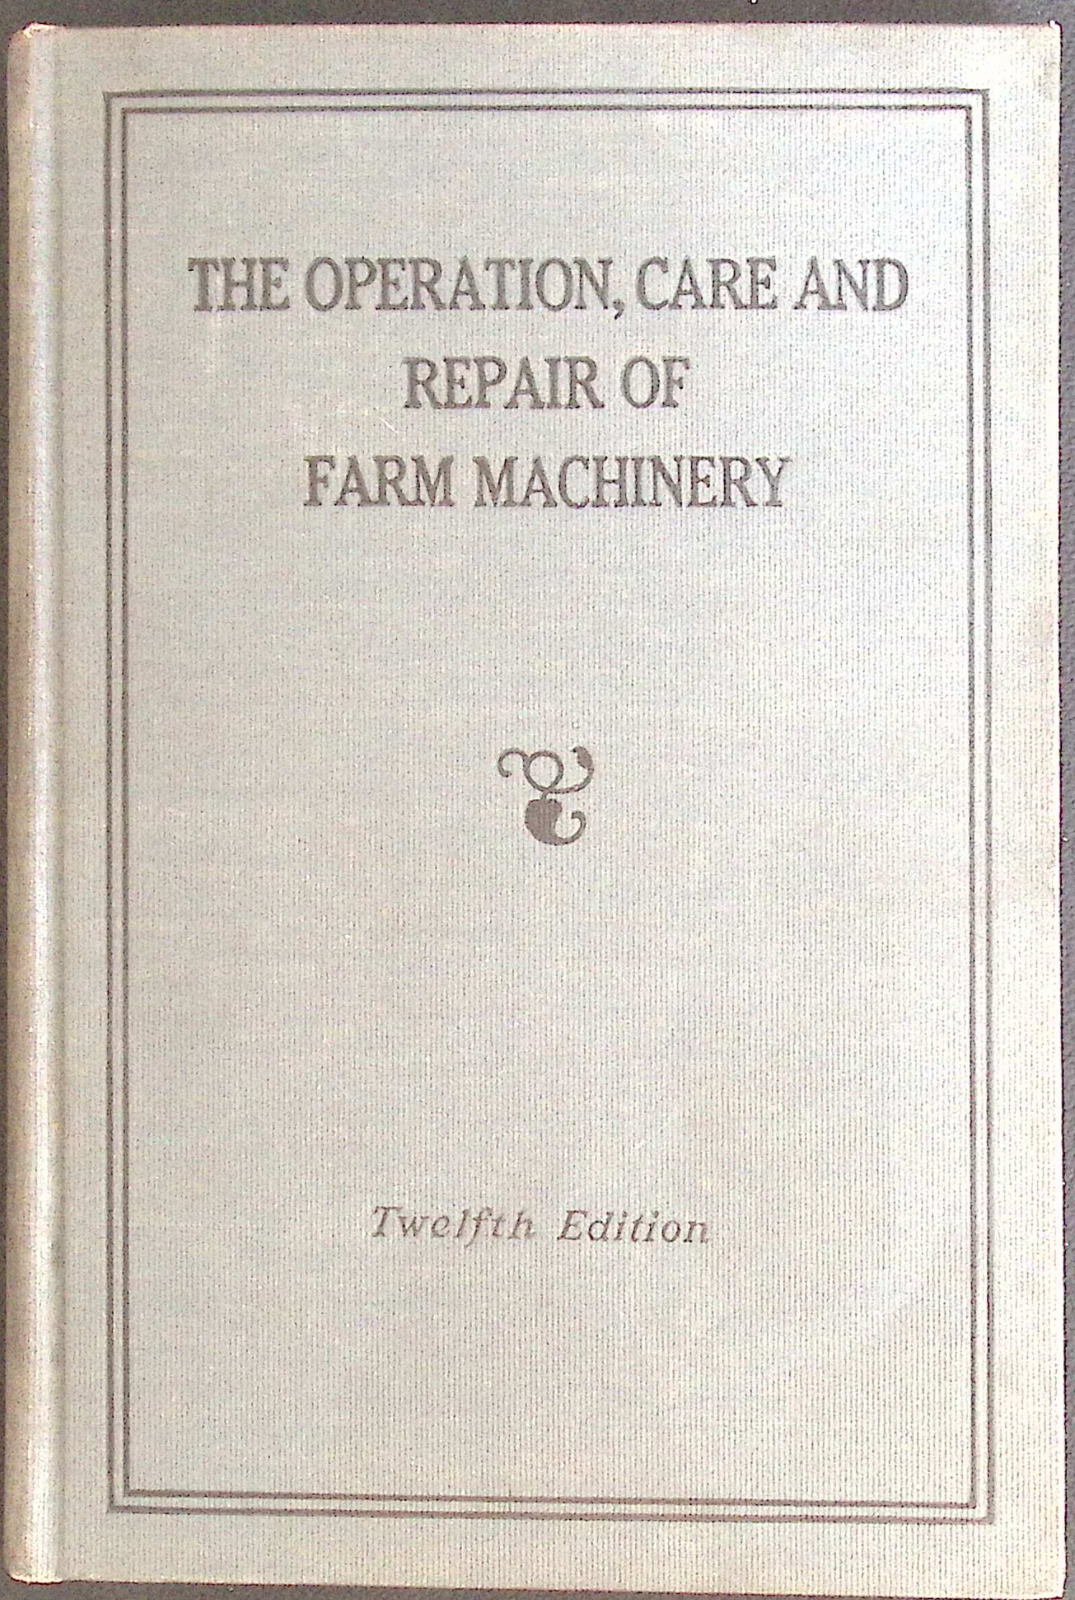 The Operation, Care and Repair of Farm Machinery - John Deere 12th Edition